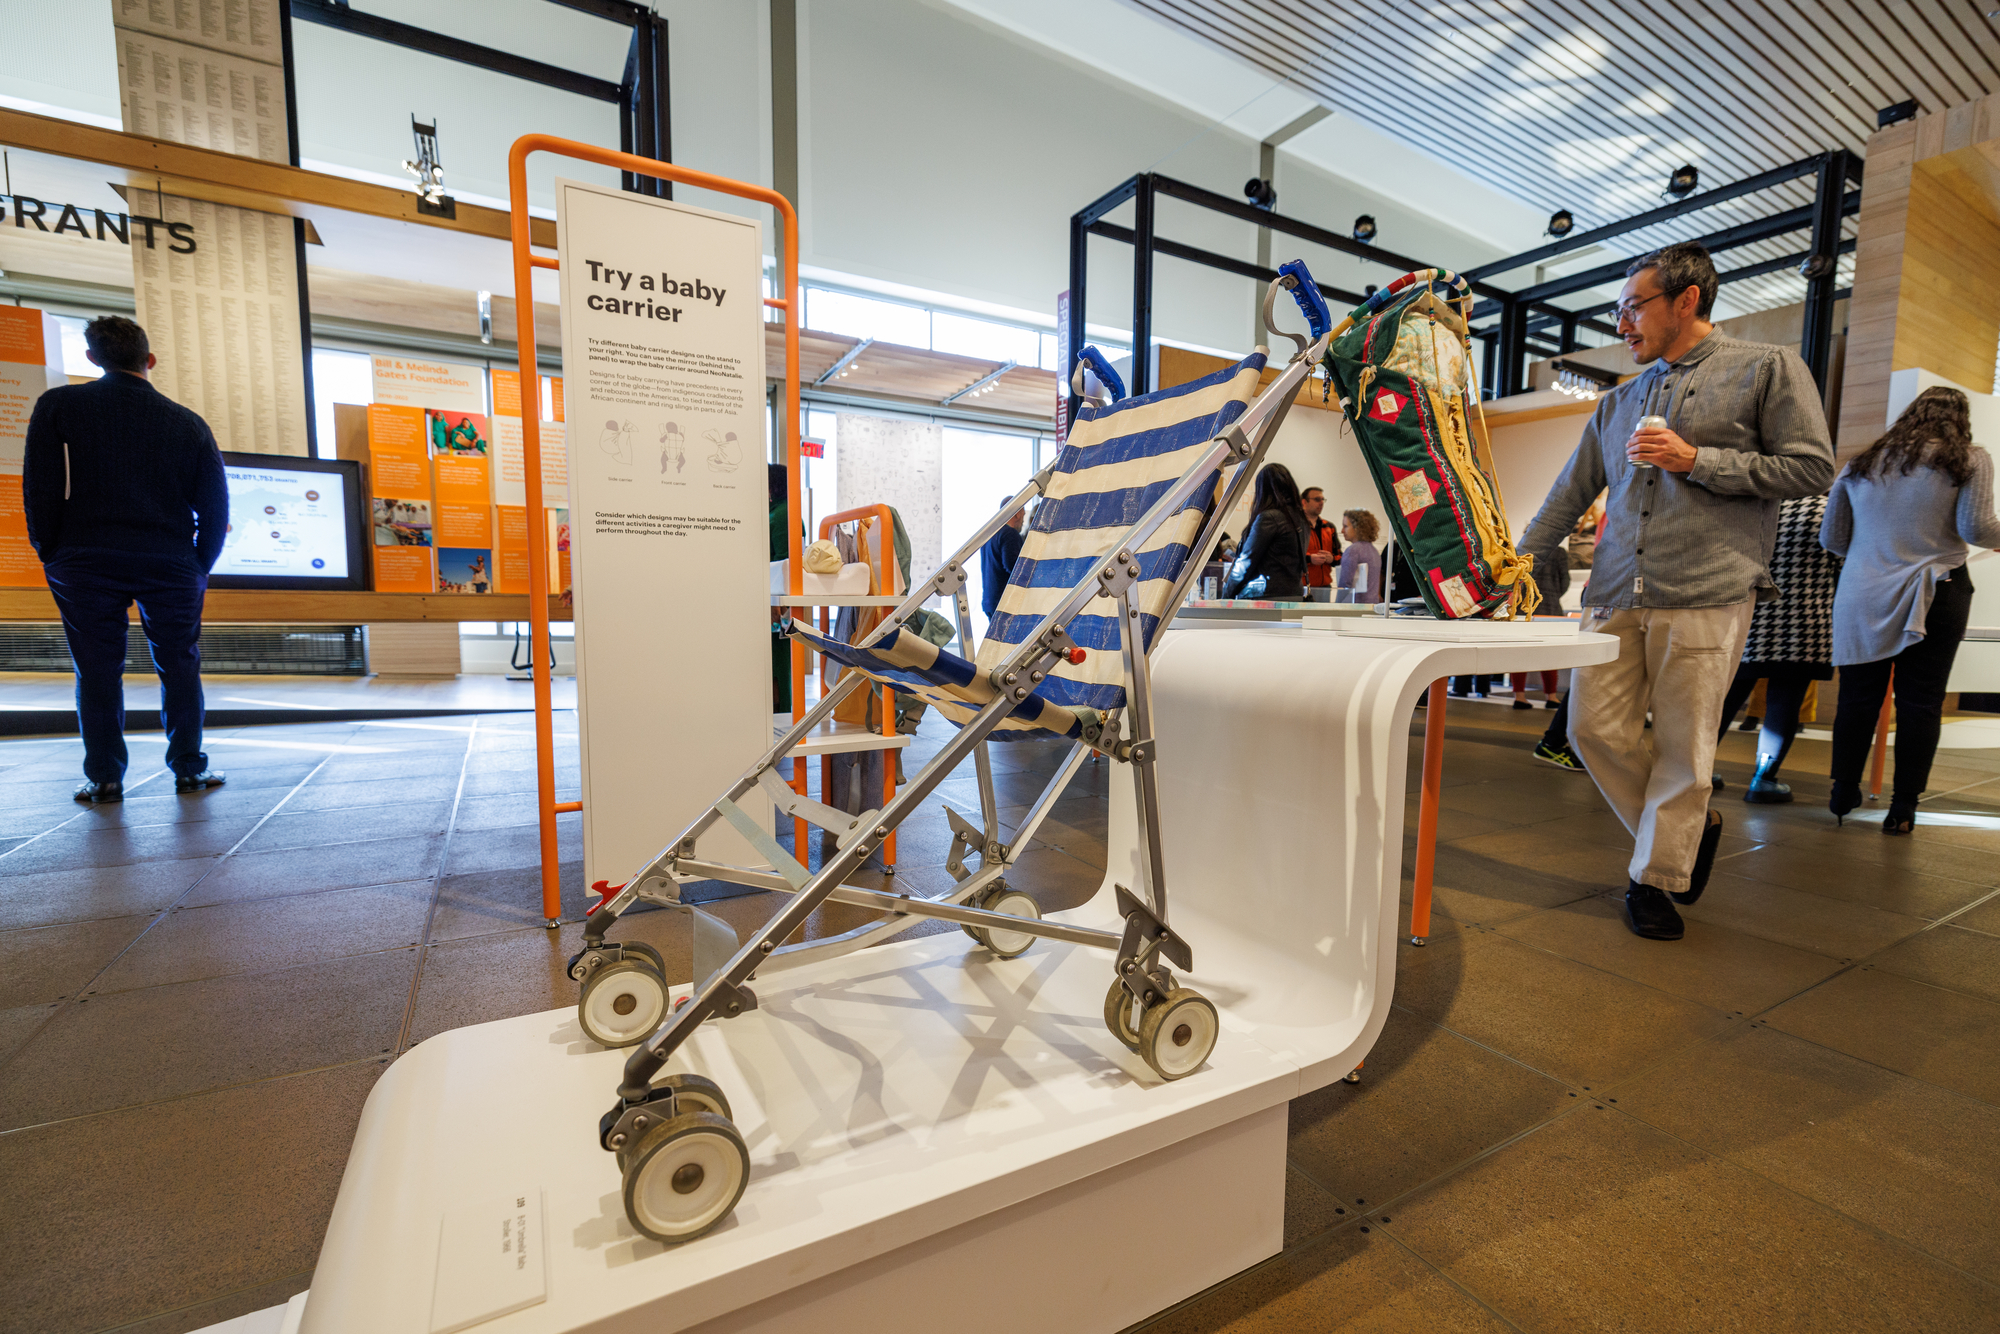 View of a stroller in the gallery space on display in the "Designing Motherhood" exhibition.